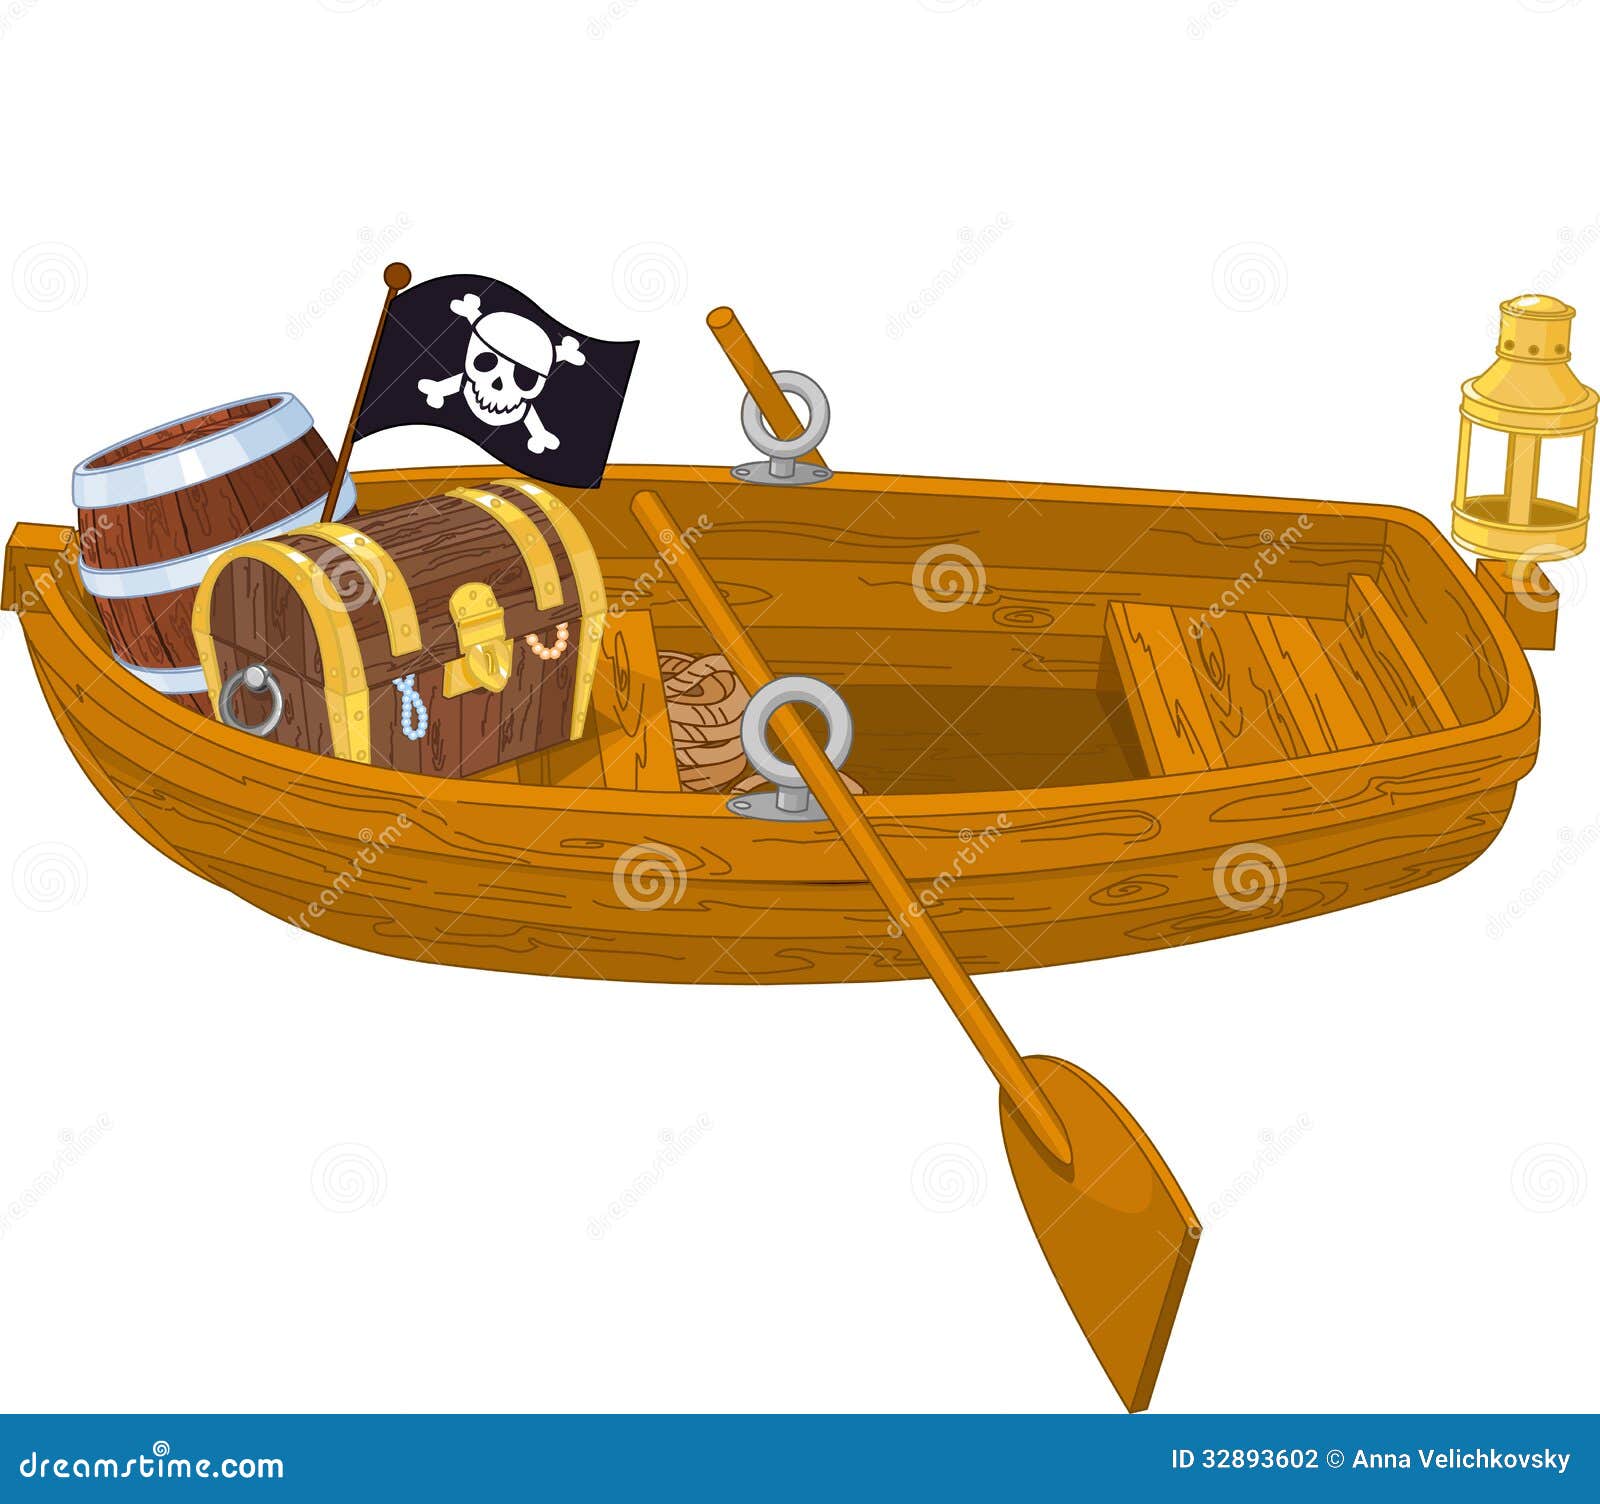 clipart rowing boat - photo #37